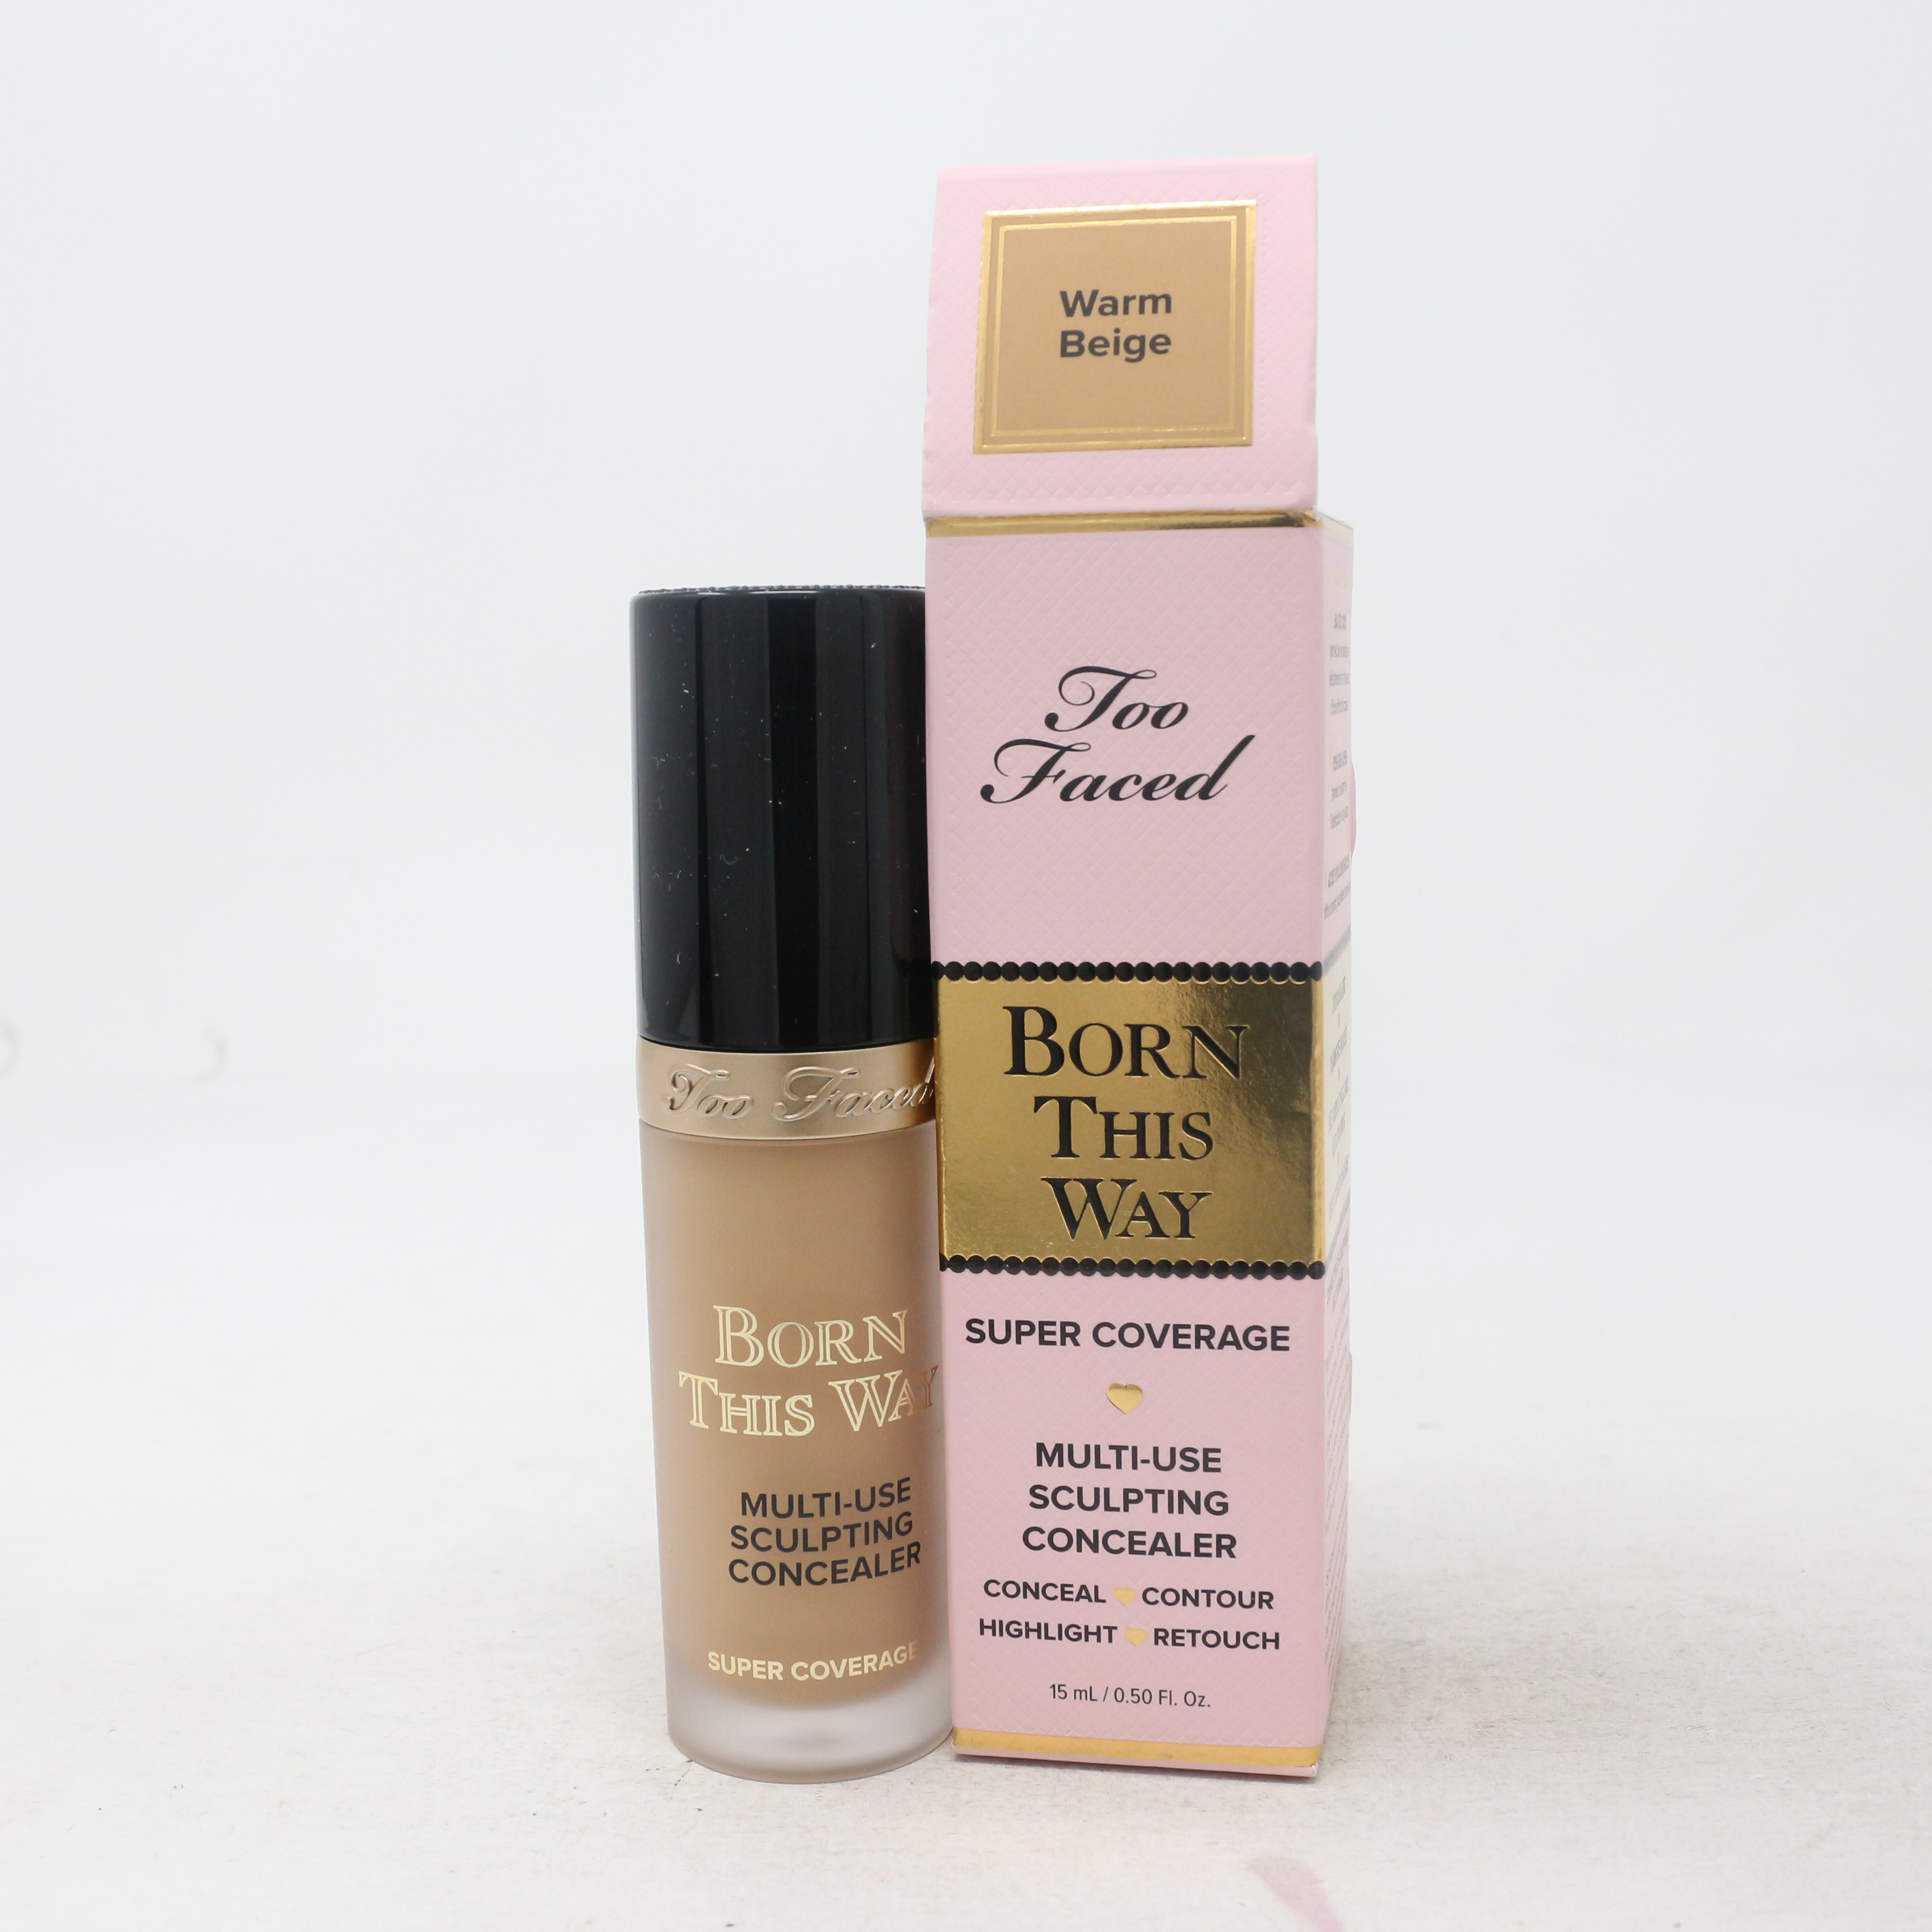 Too Faced Born Way Super Coverage Concealer 0.5oz/15ml New With Box - Walmart.com